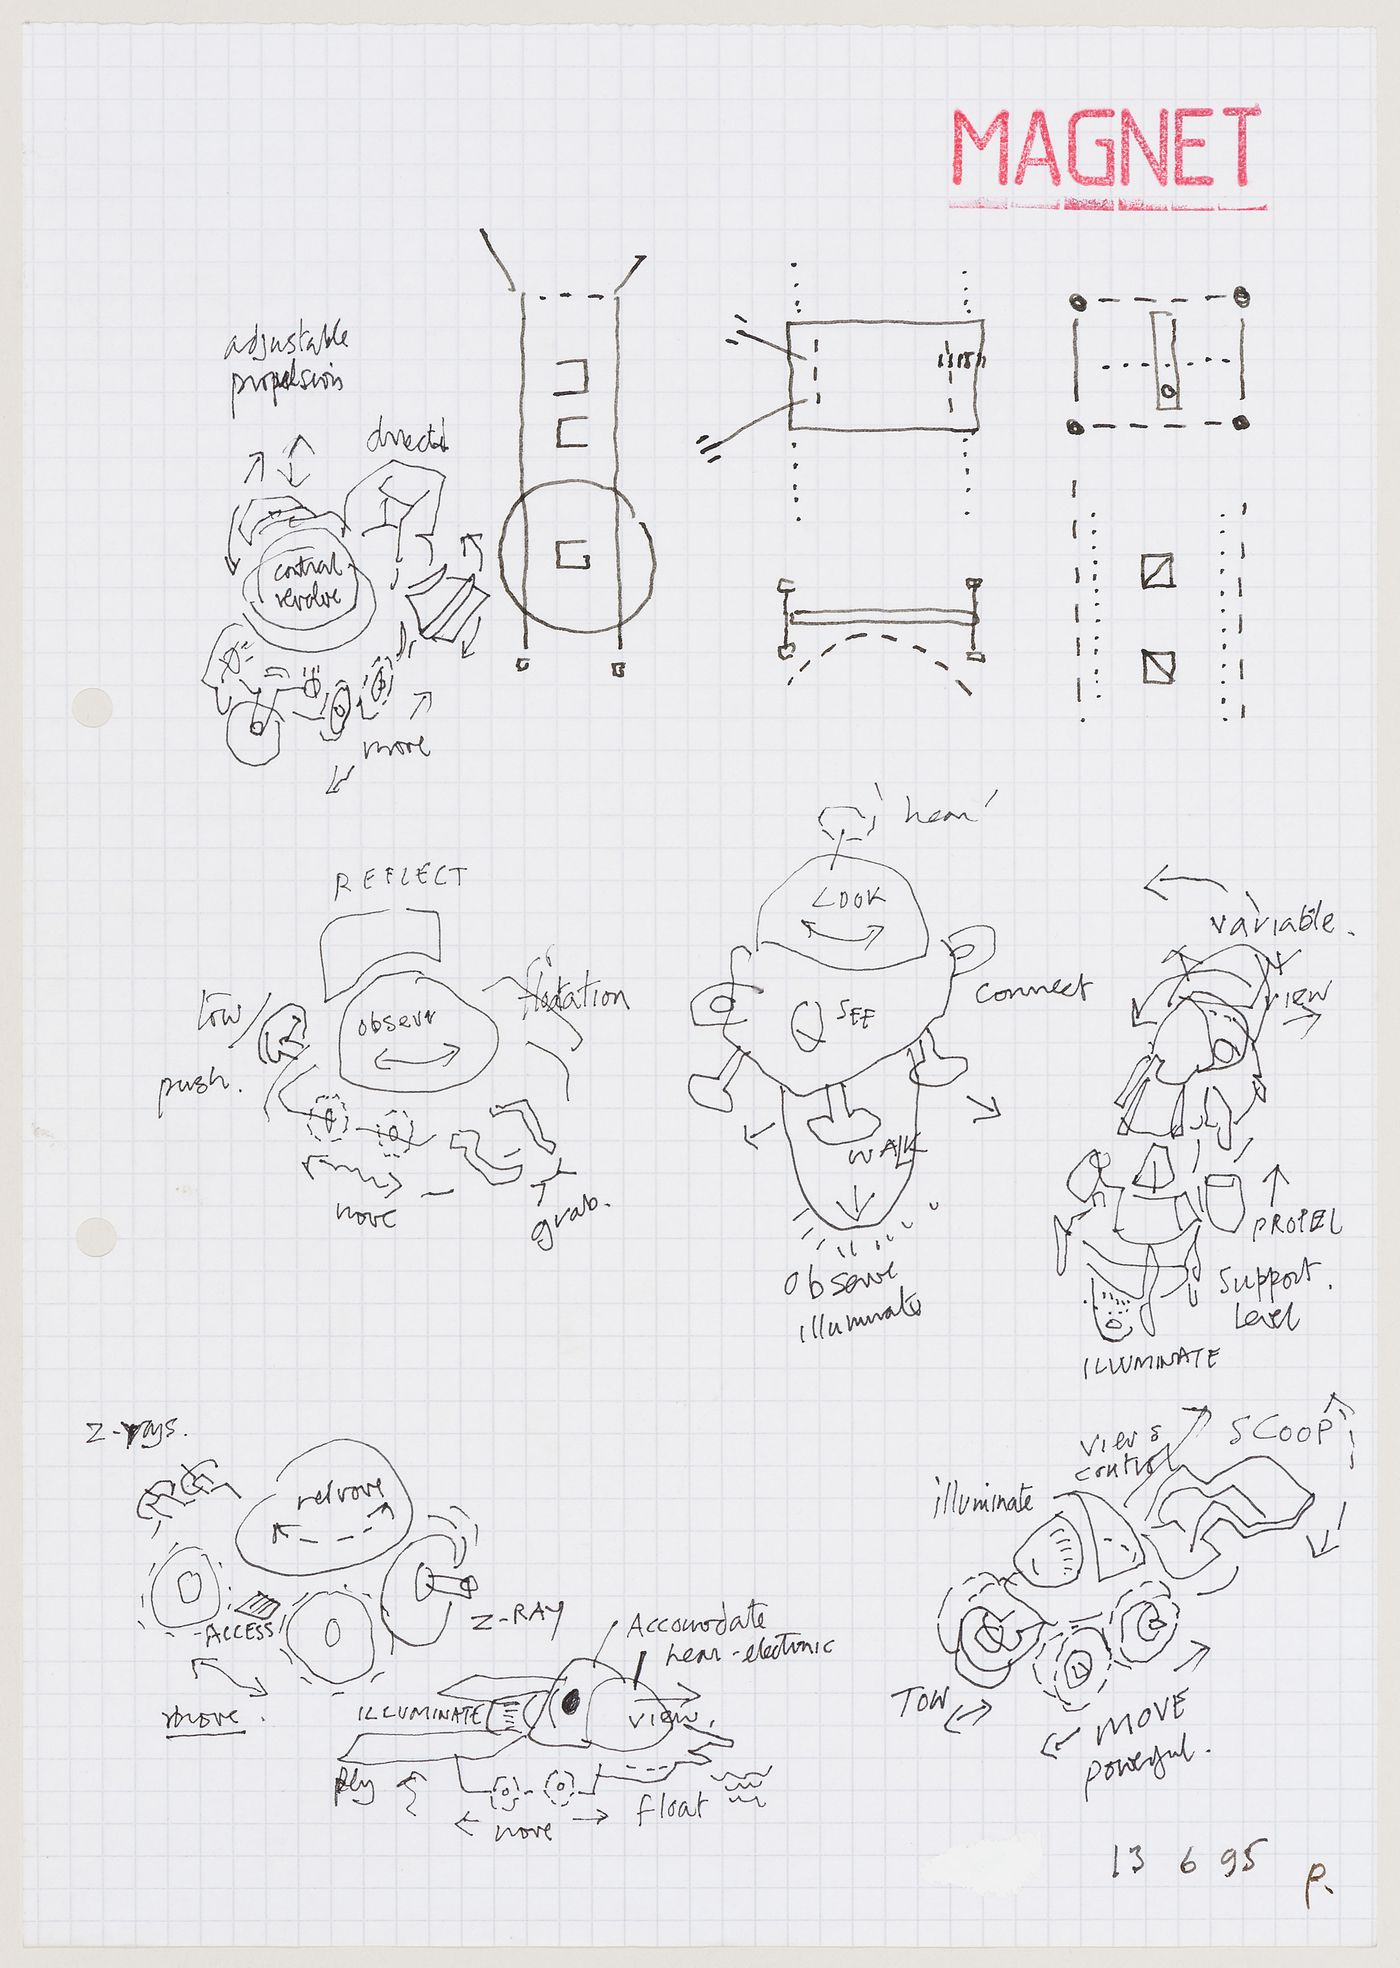 Magnet: conceptual sketches for magnets and vehicles